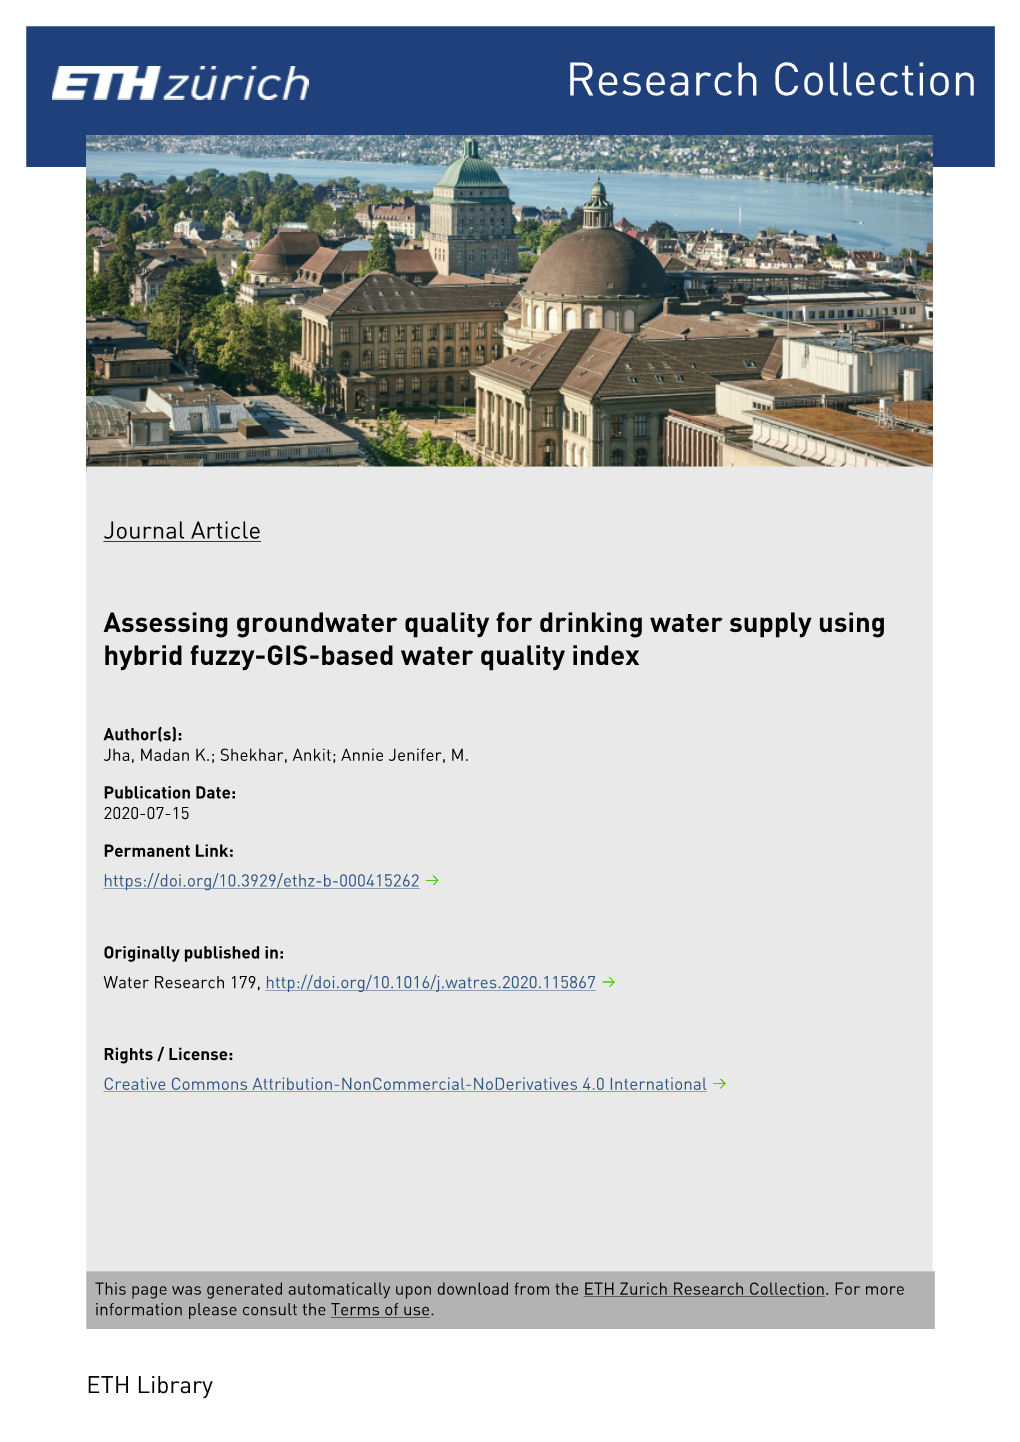 Assessing Groundwater Quality for Drinking Water Supply Using Hybrid Fuzzy-GIS-Based Water Quality Index